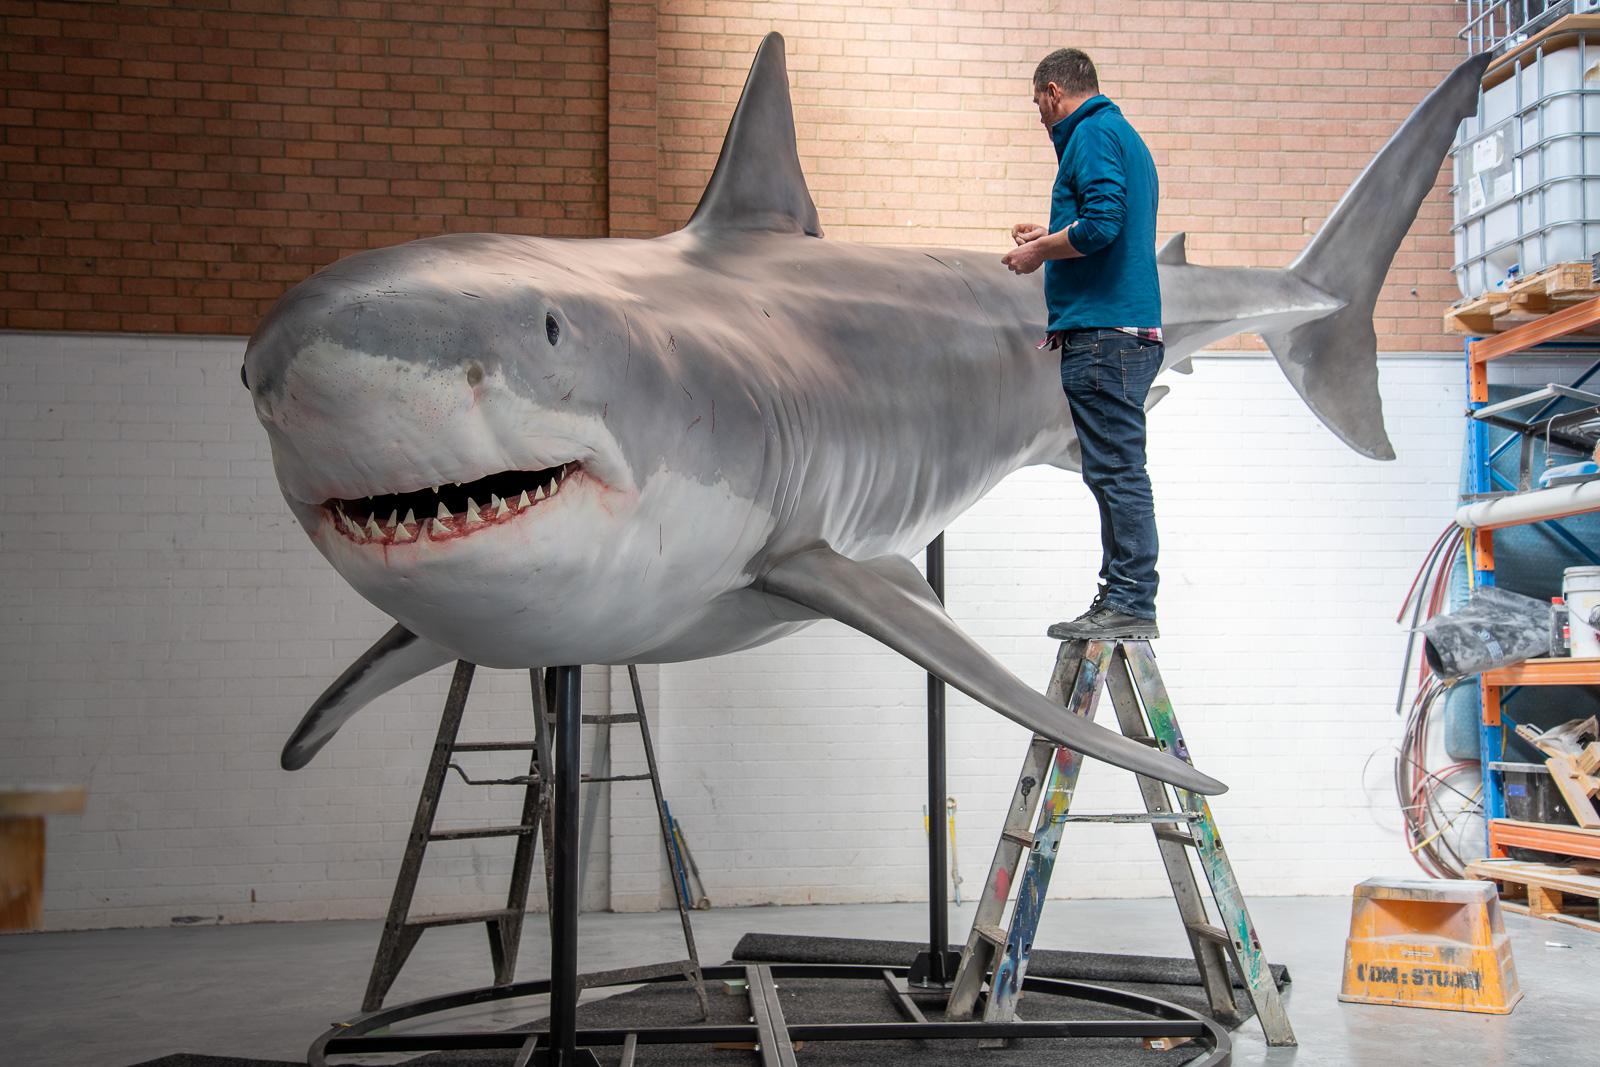 Life Size Sharks & Fish Models for Displays & Photo Opportunities